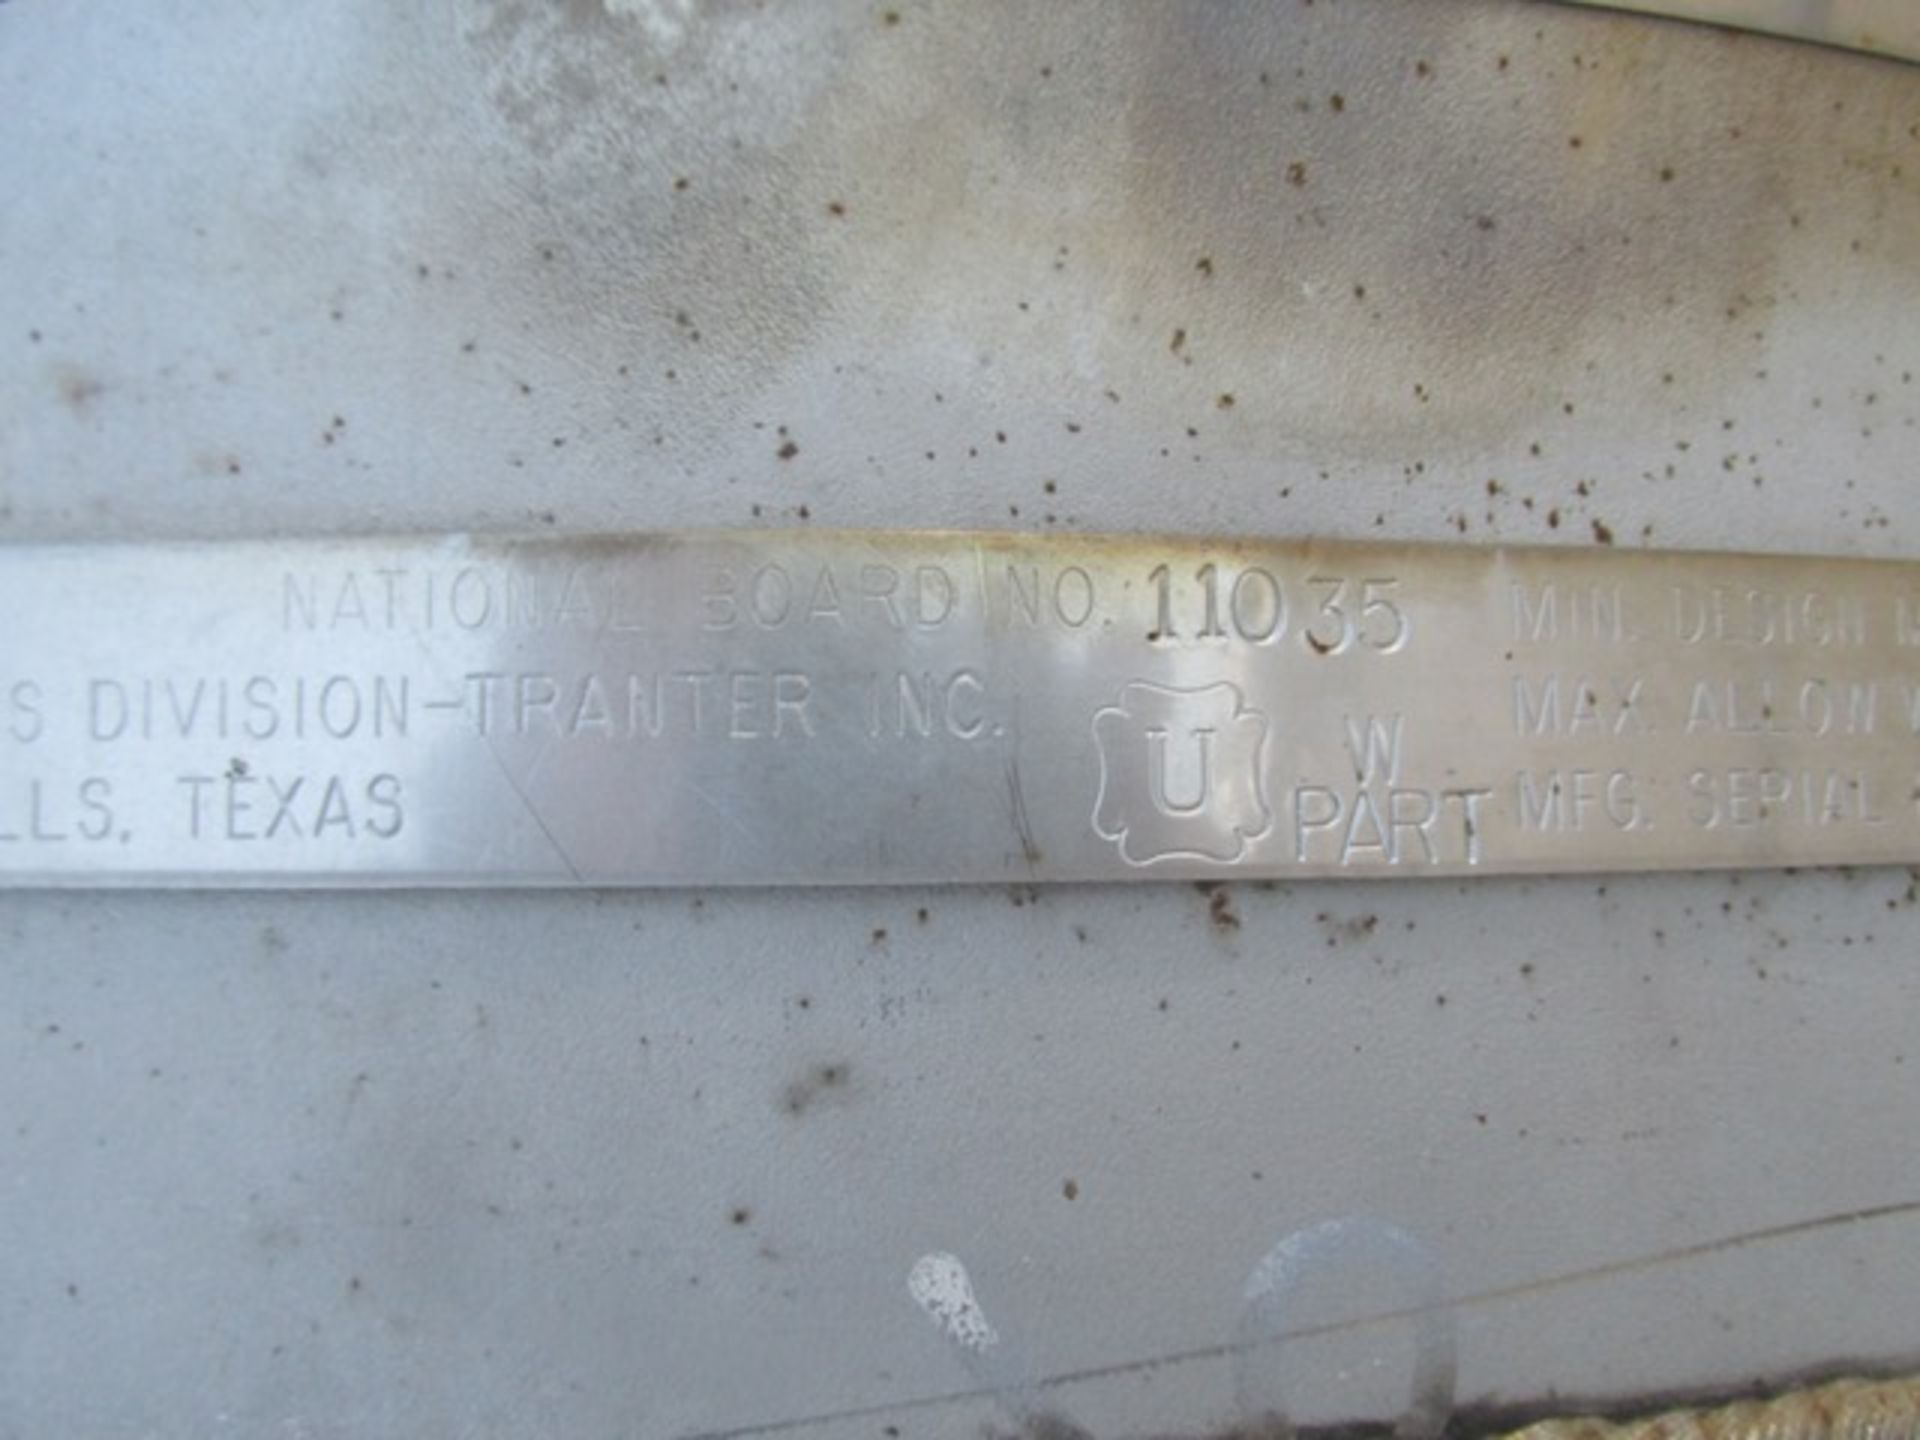 100 gallon Tolan reactor body, stainless steel construction,approx. 24" diameter x 48" straight side - Image 7 of 9